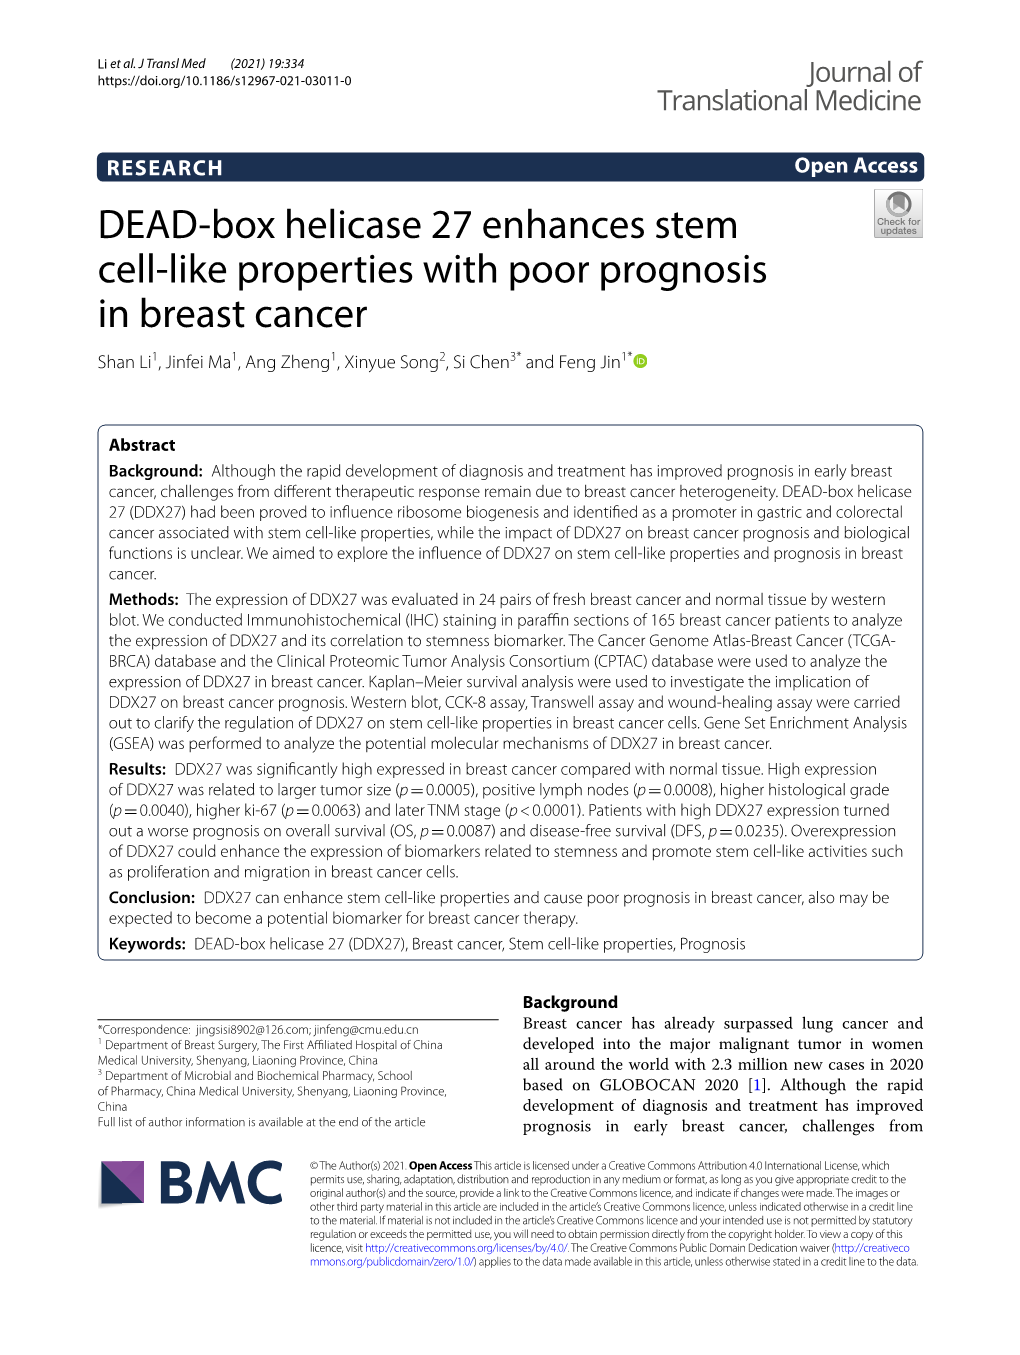 DEAD-Box Helicase 27 Enhances Stem Cell-Like Properties with Poor